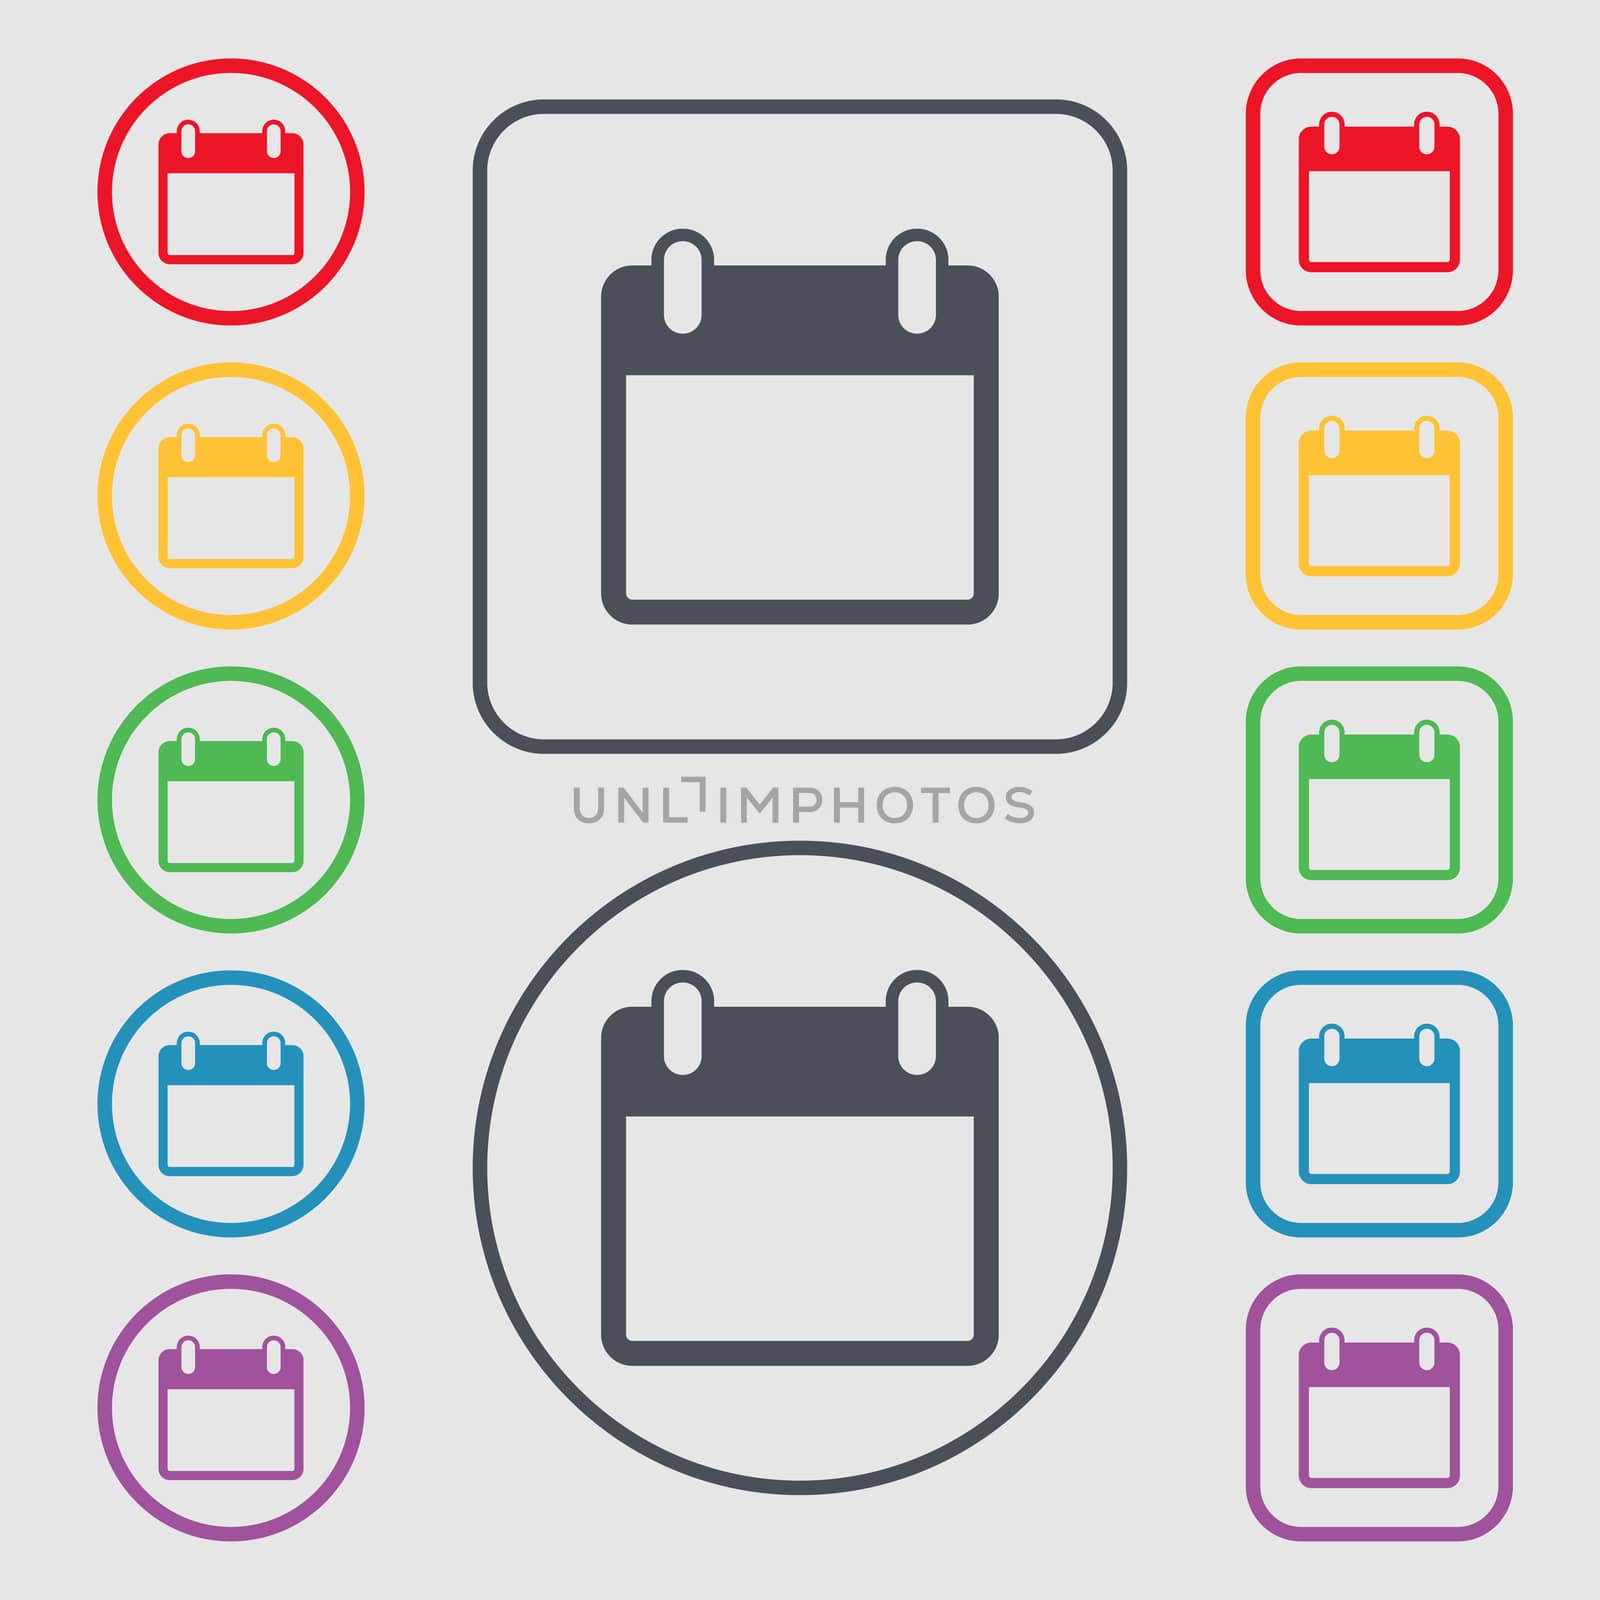 Calendar sign icon. days month symbol. Date button. Symbols on the Round and square buttons with frame. illustration